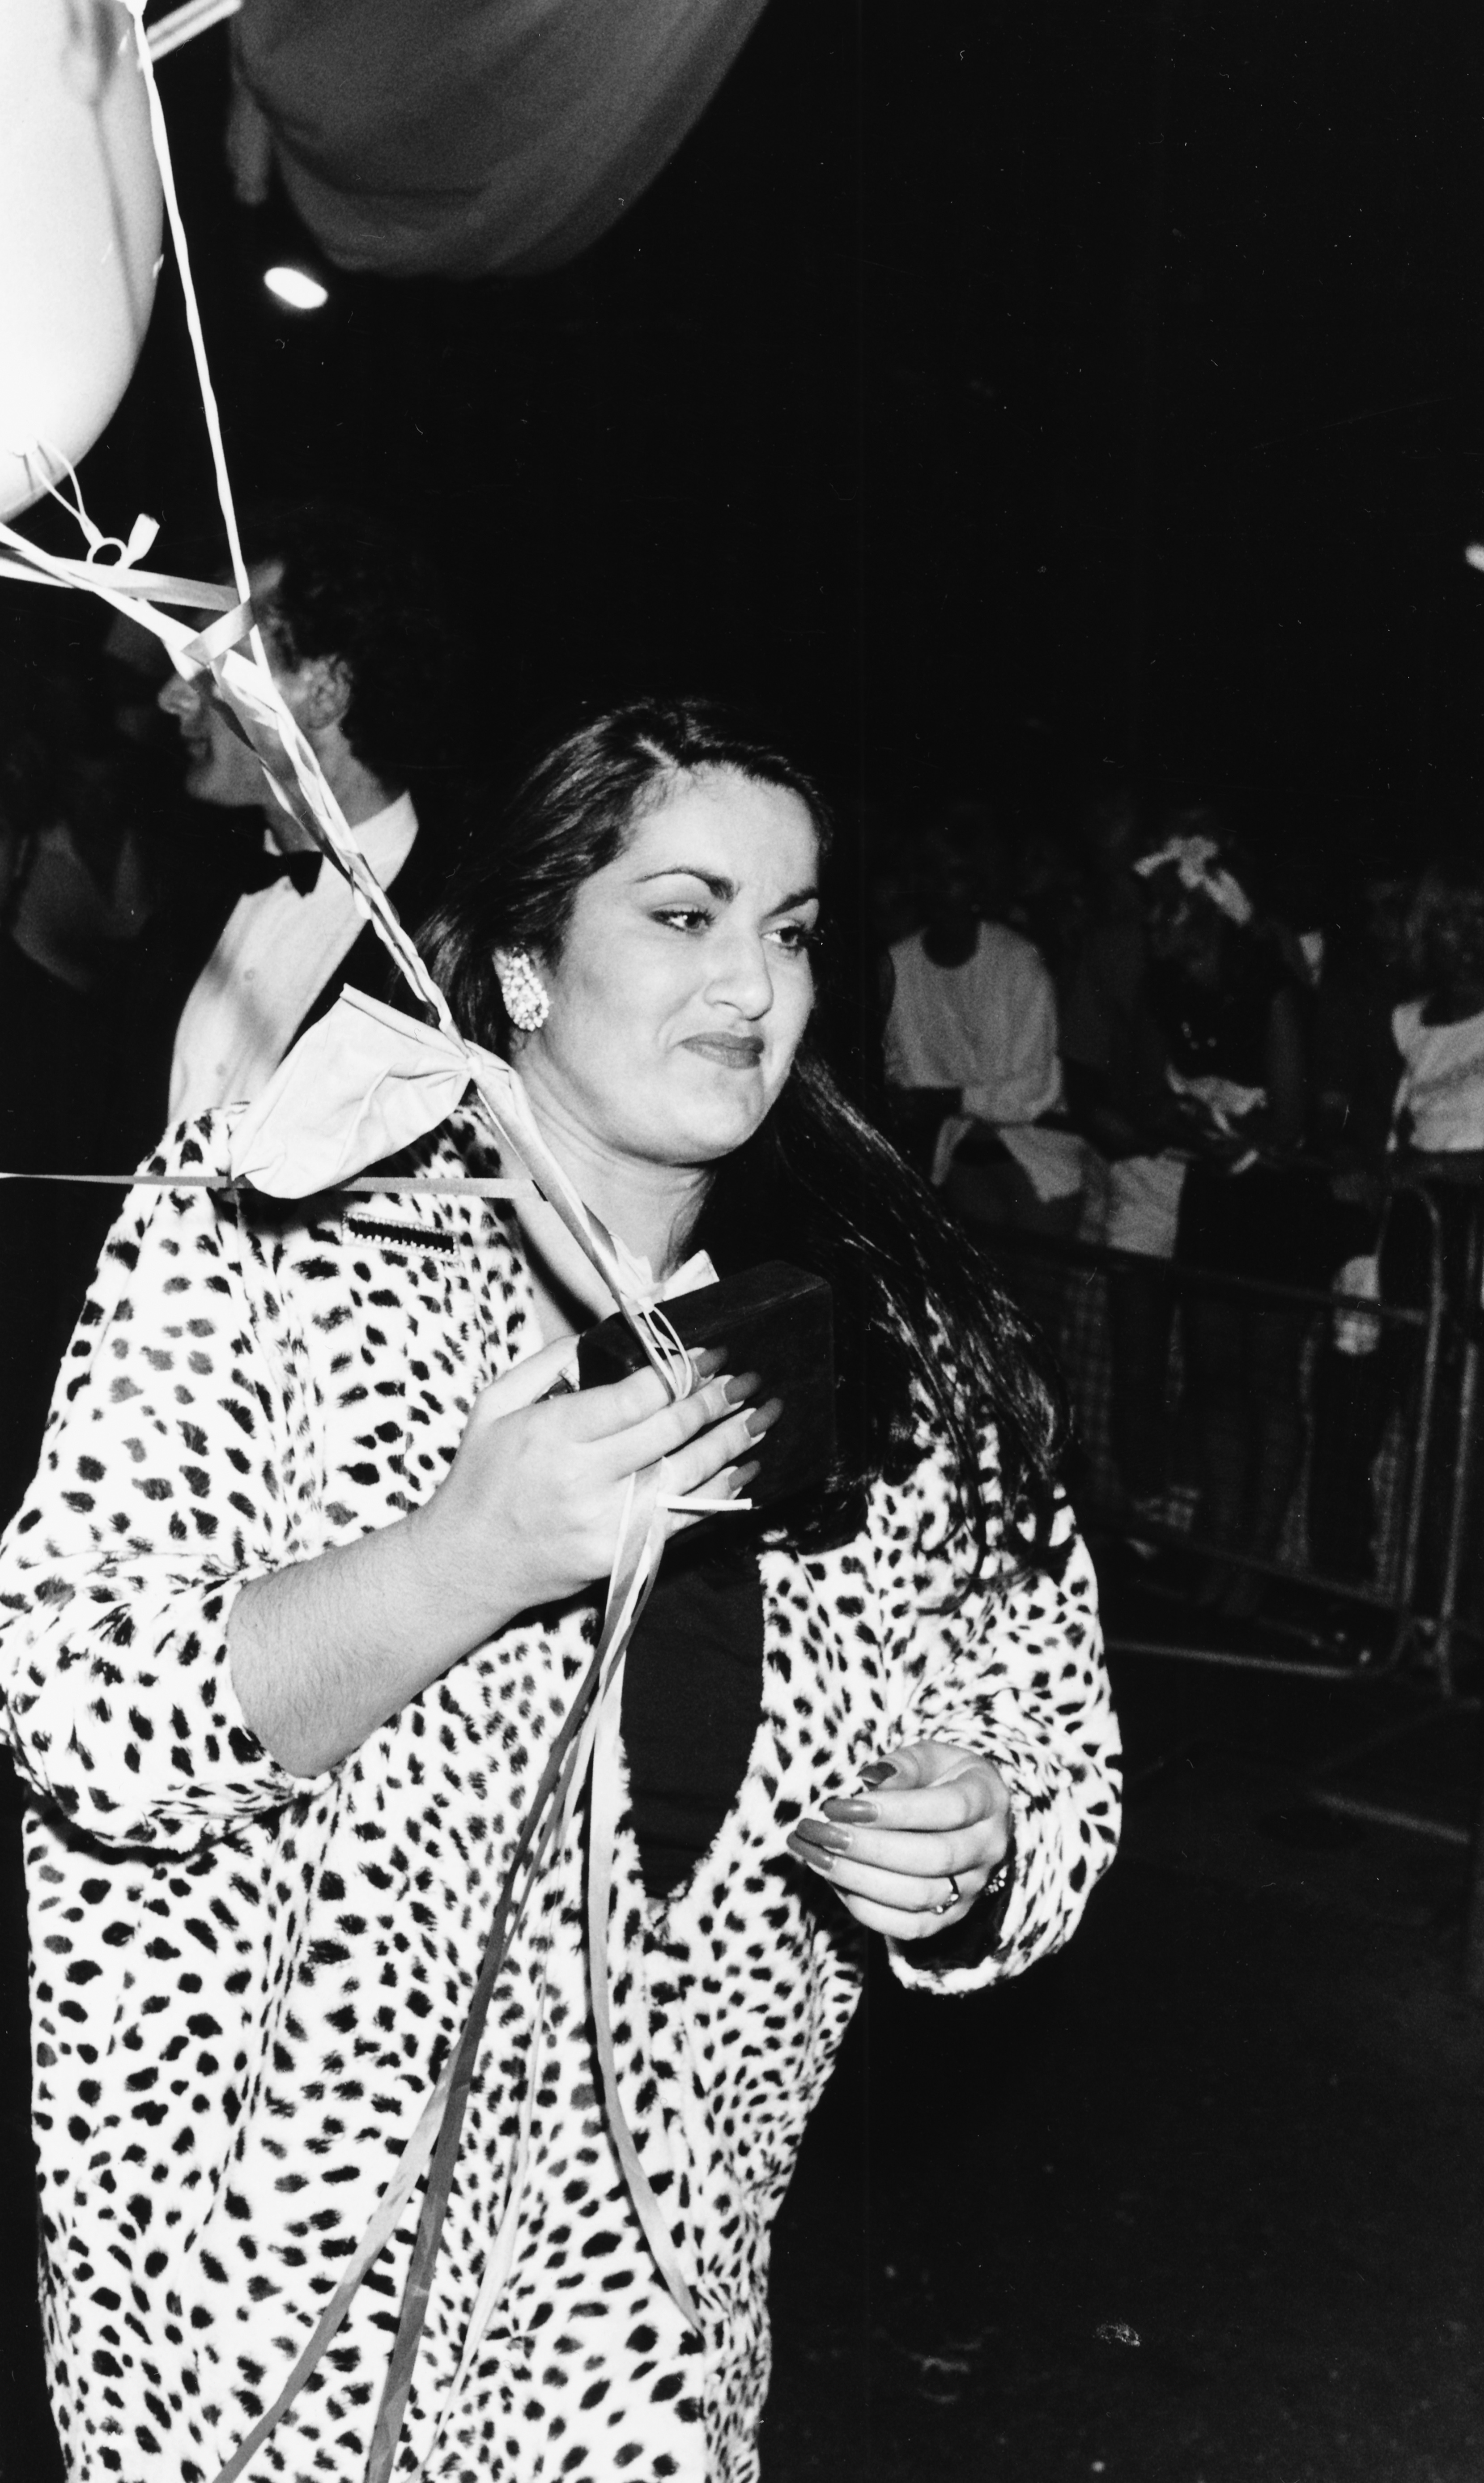 Melanie Panayiotou at the "Wham!" farewell party on July 8, 1986 in London, England | Source: Getty Images